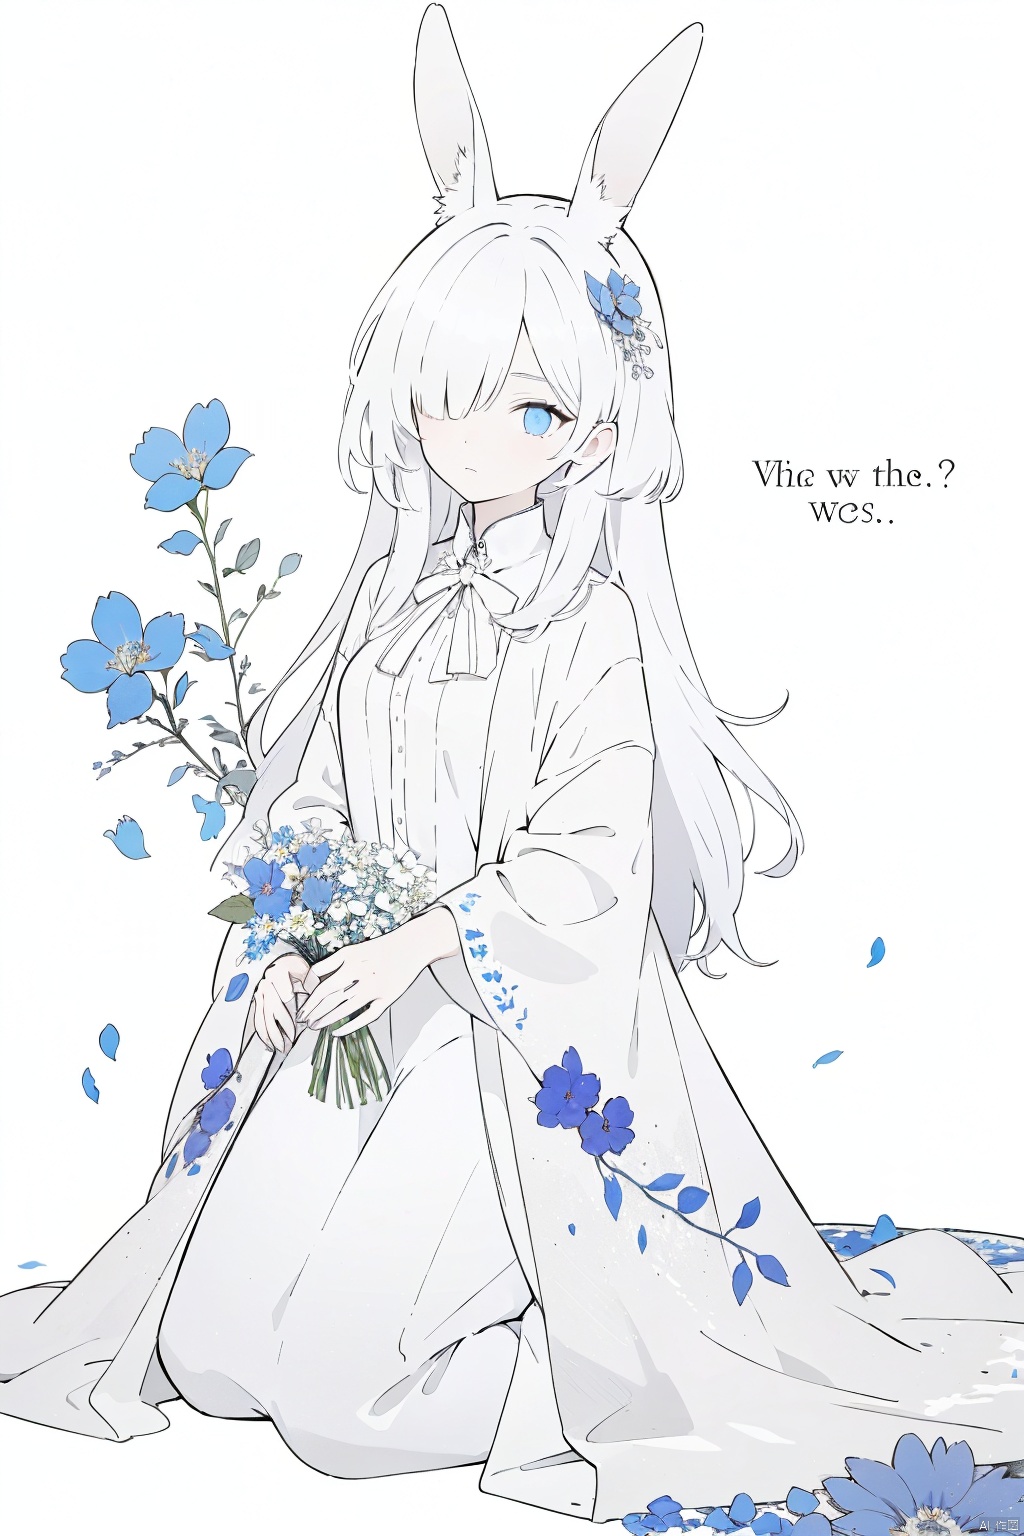  1girl, blue eyes, white long translucent night gown, expressionless, (white hair), hair cover one eye, long hair, blue hair flower, kneeling on lake, blood, (plenty of blue petals:1.35), (white background:1.5), (English text), greyscale, monochrome,greyscale,monochrome,sketch, rabbit ears, BJ_Violent_graffiti, wunv, The earth, gummy_(arknights), Pencil hand drawing